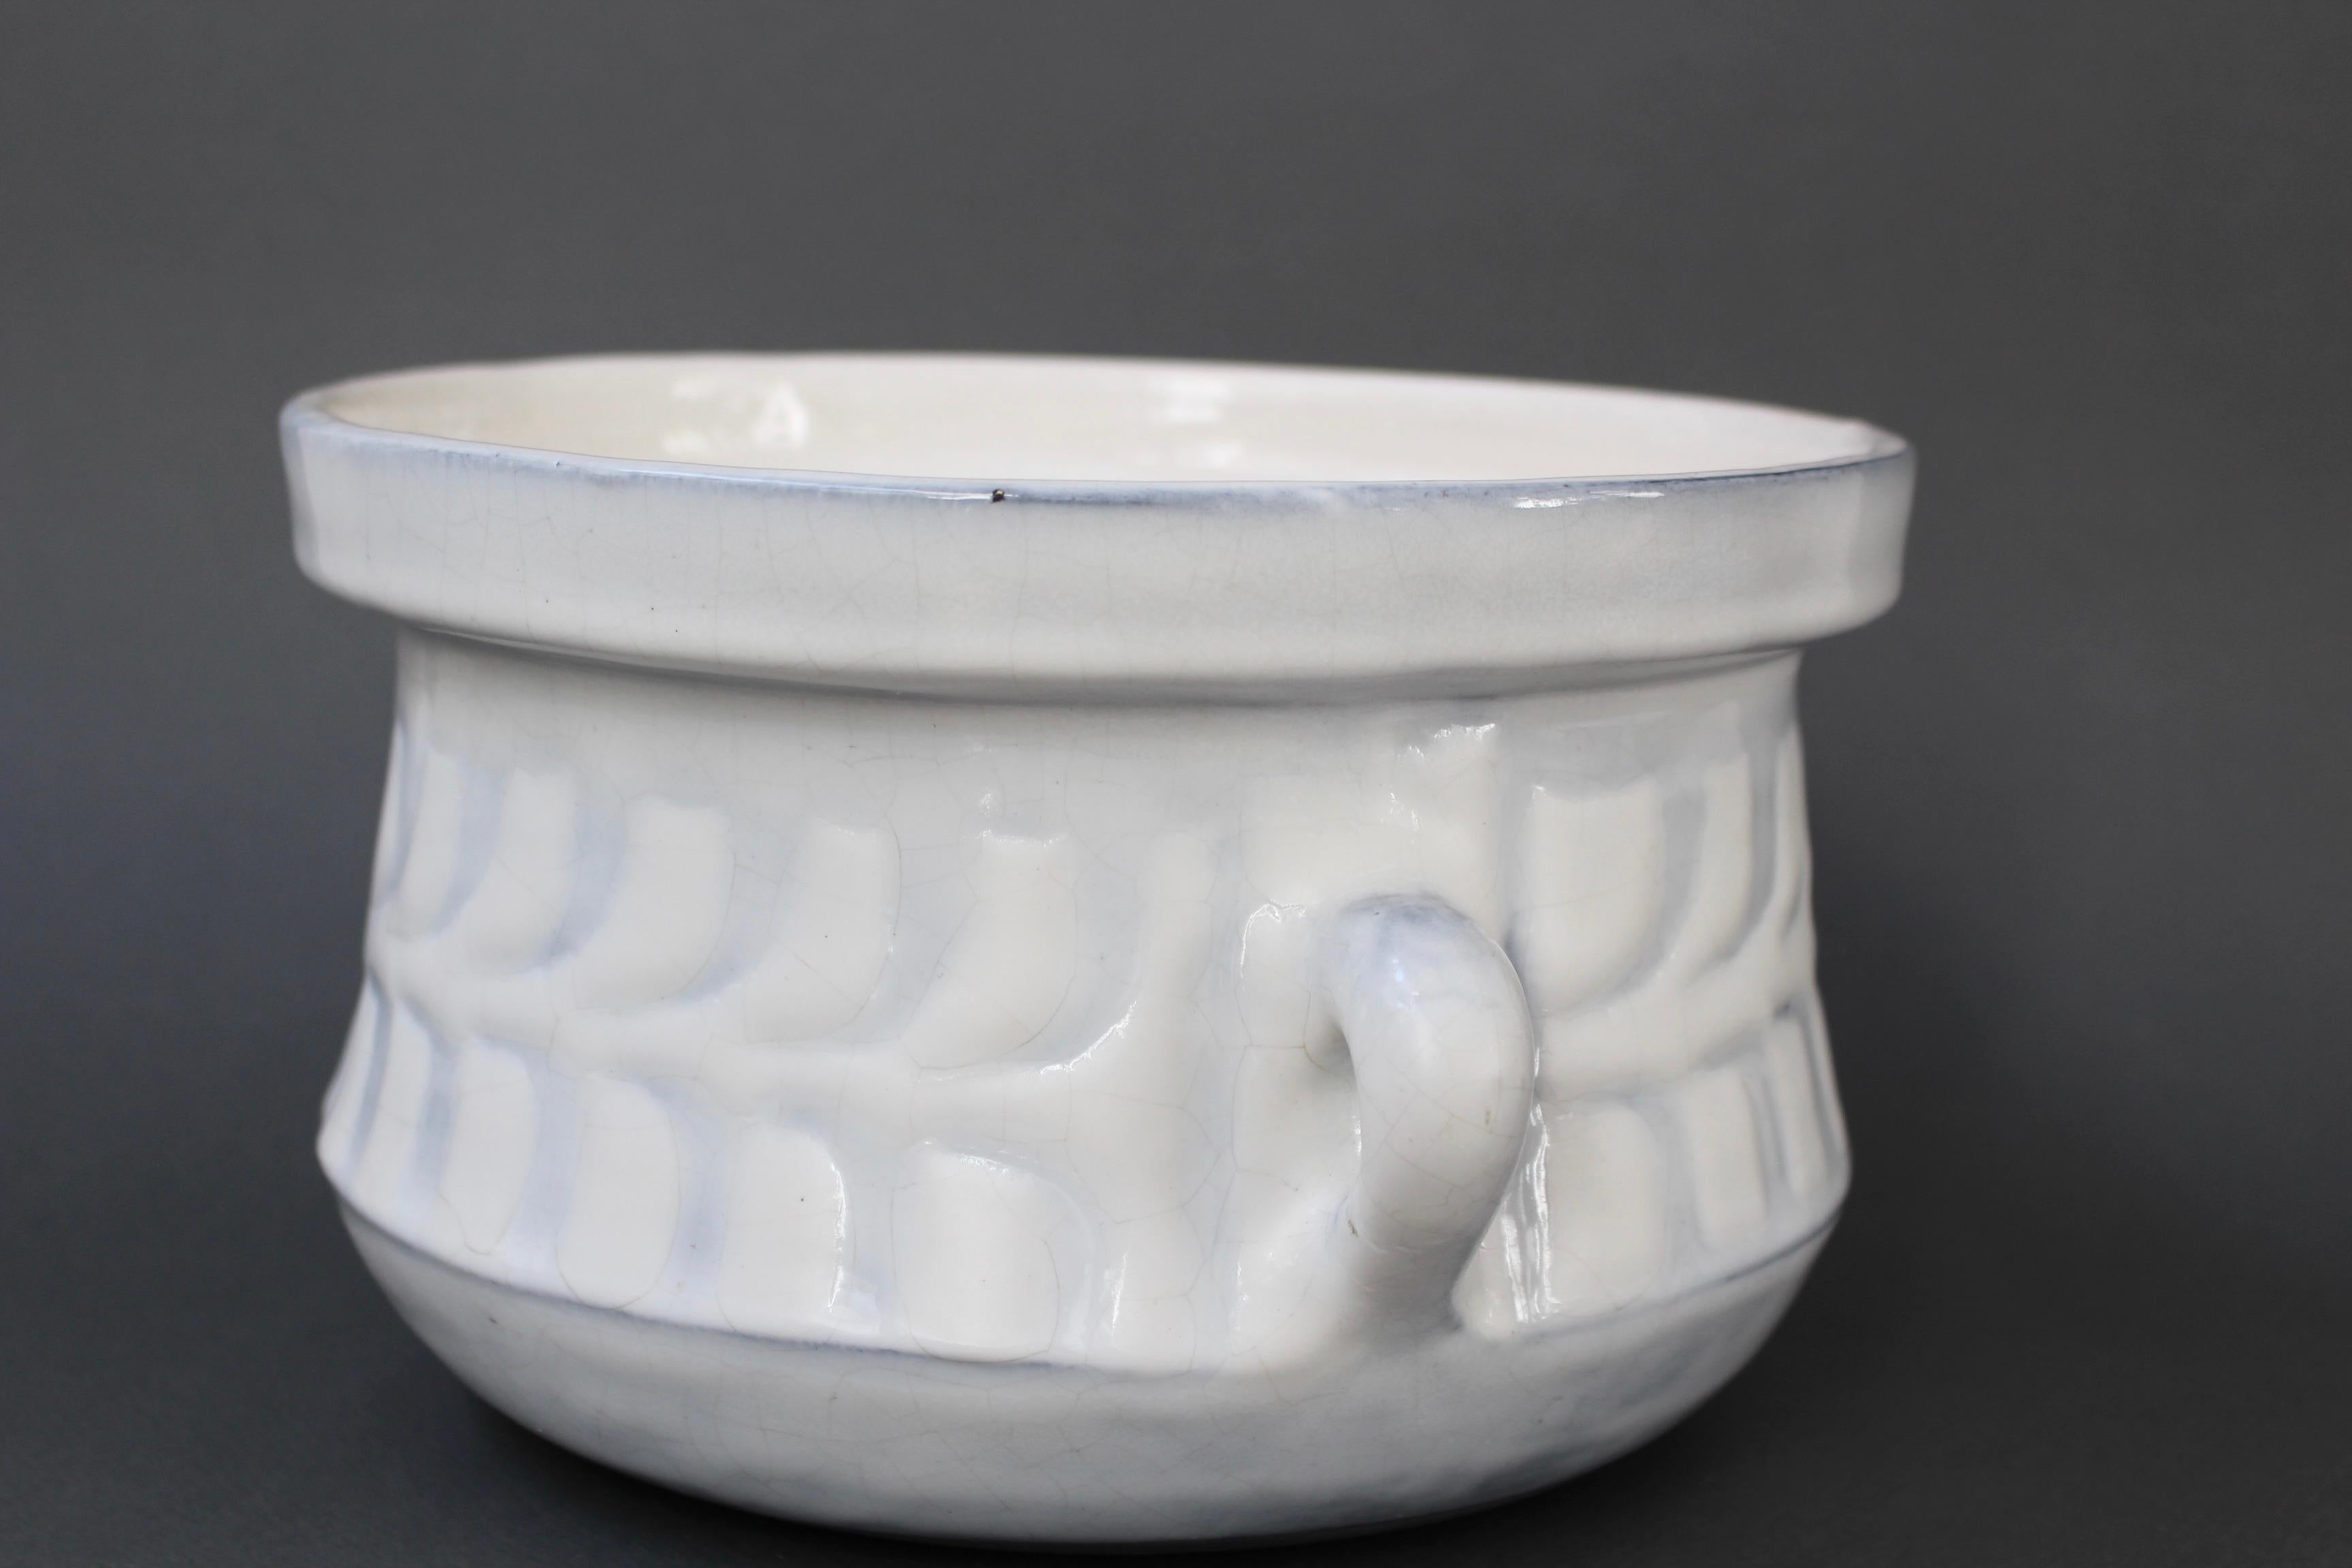 Vintage French Ceramic Tureen by Roger Capron, 'circa 1960s' For Sale 5